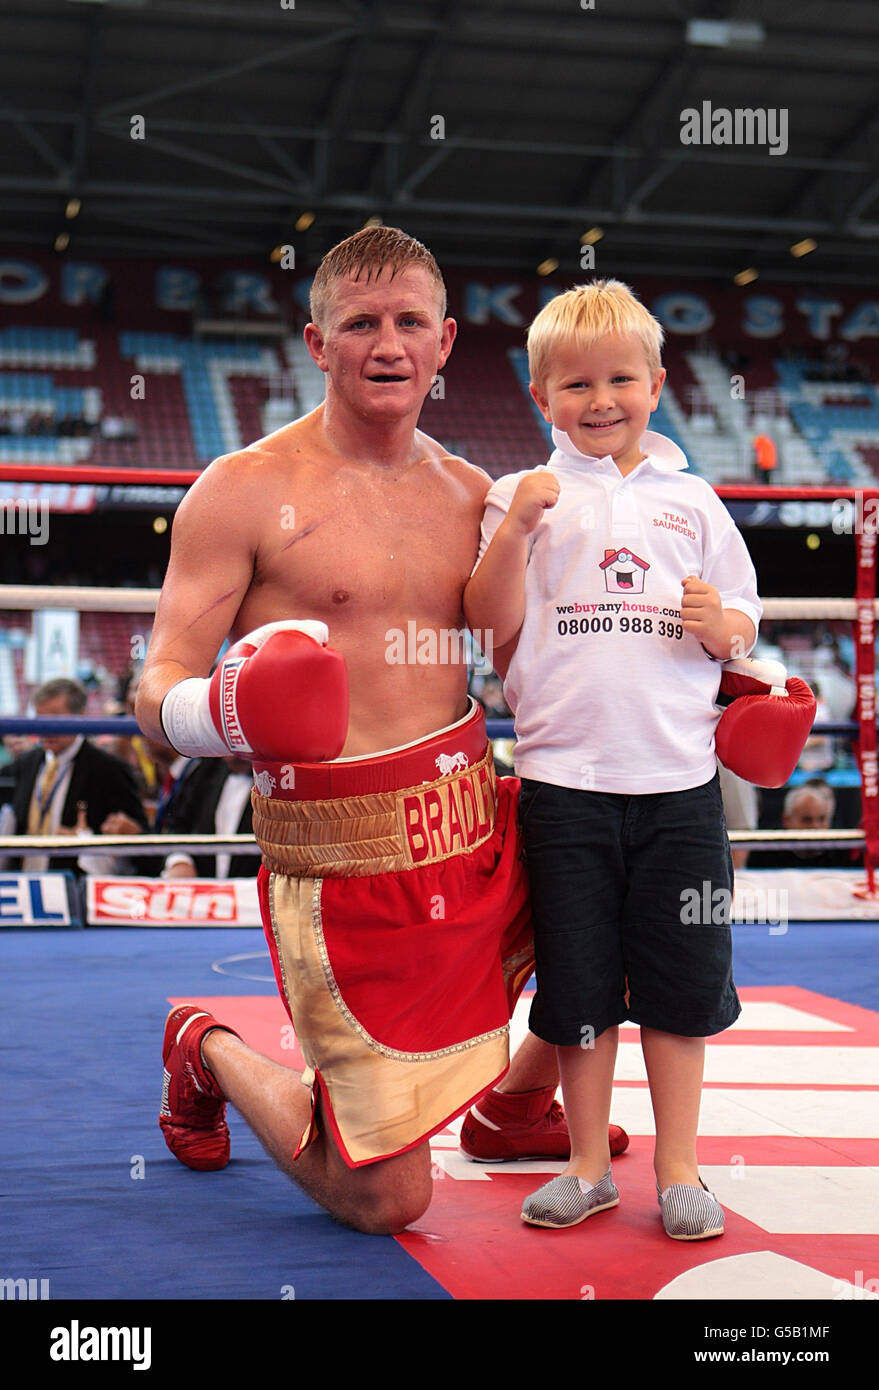 Bradley Saunders celebrates after beating Kevin McCauley with his son Leighton, aged 5, in a light-welterweight bout at Upton Park, London. Stock Photo